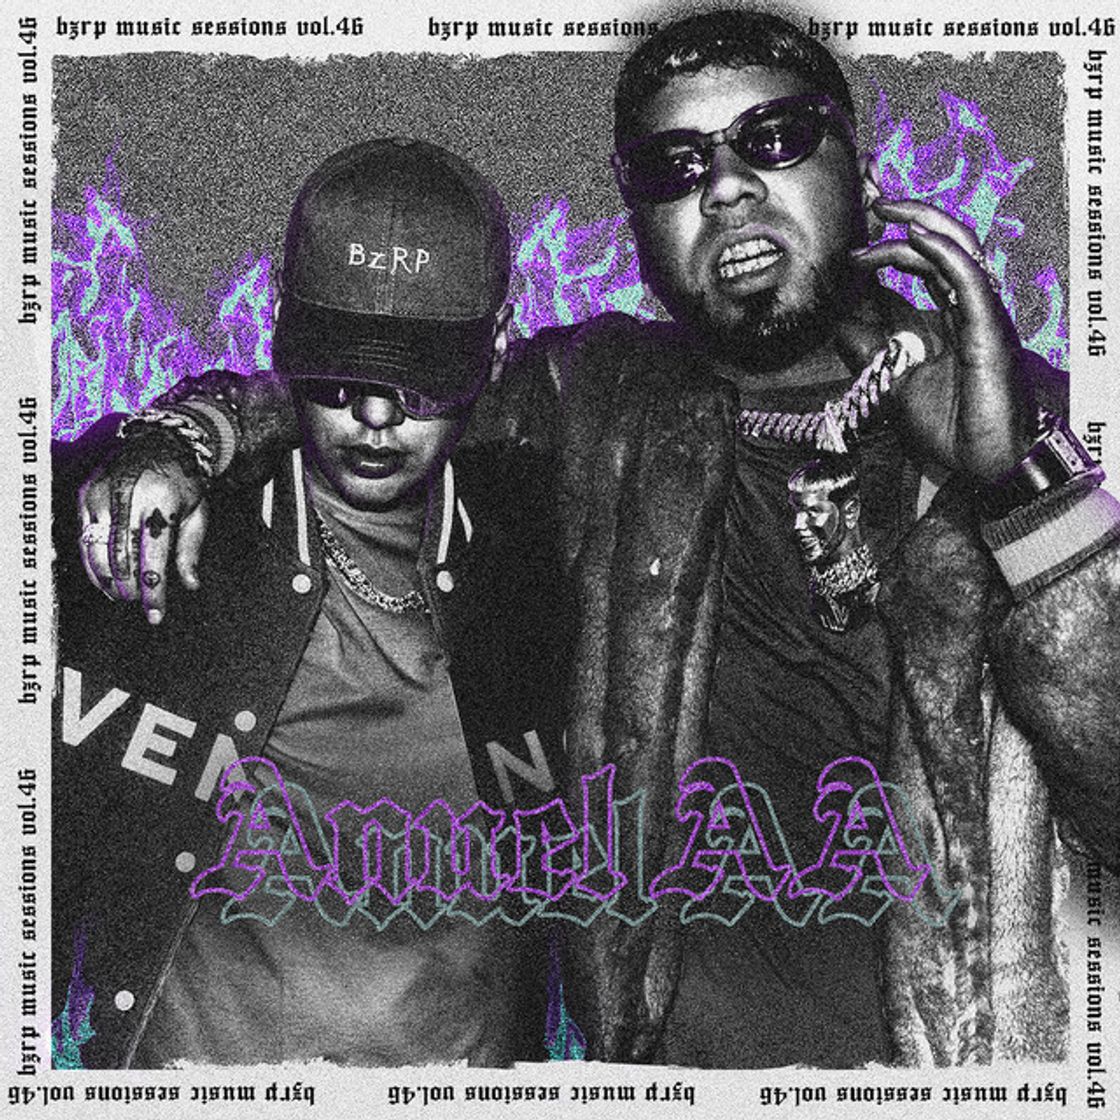 Anuel AA: Bzrp Music Session: Vol. 46